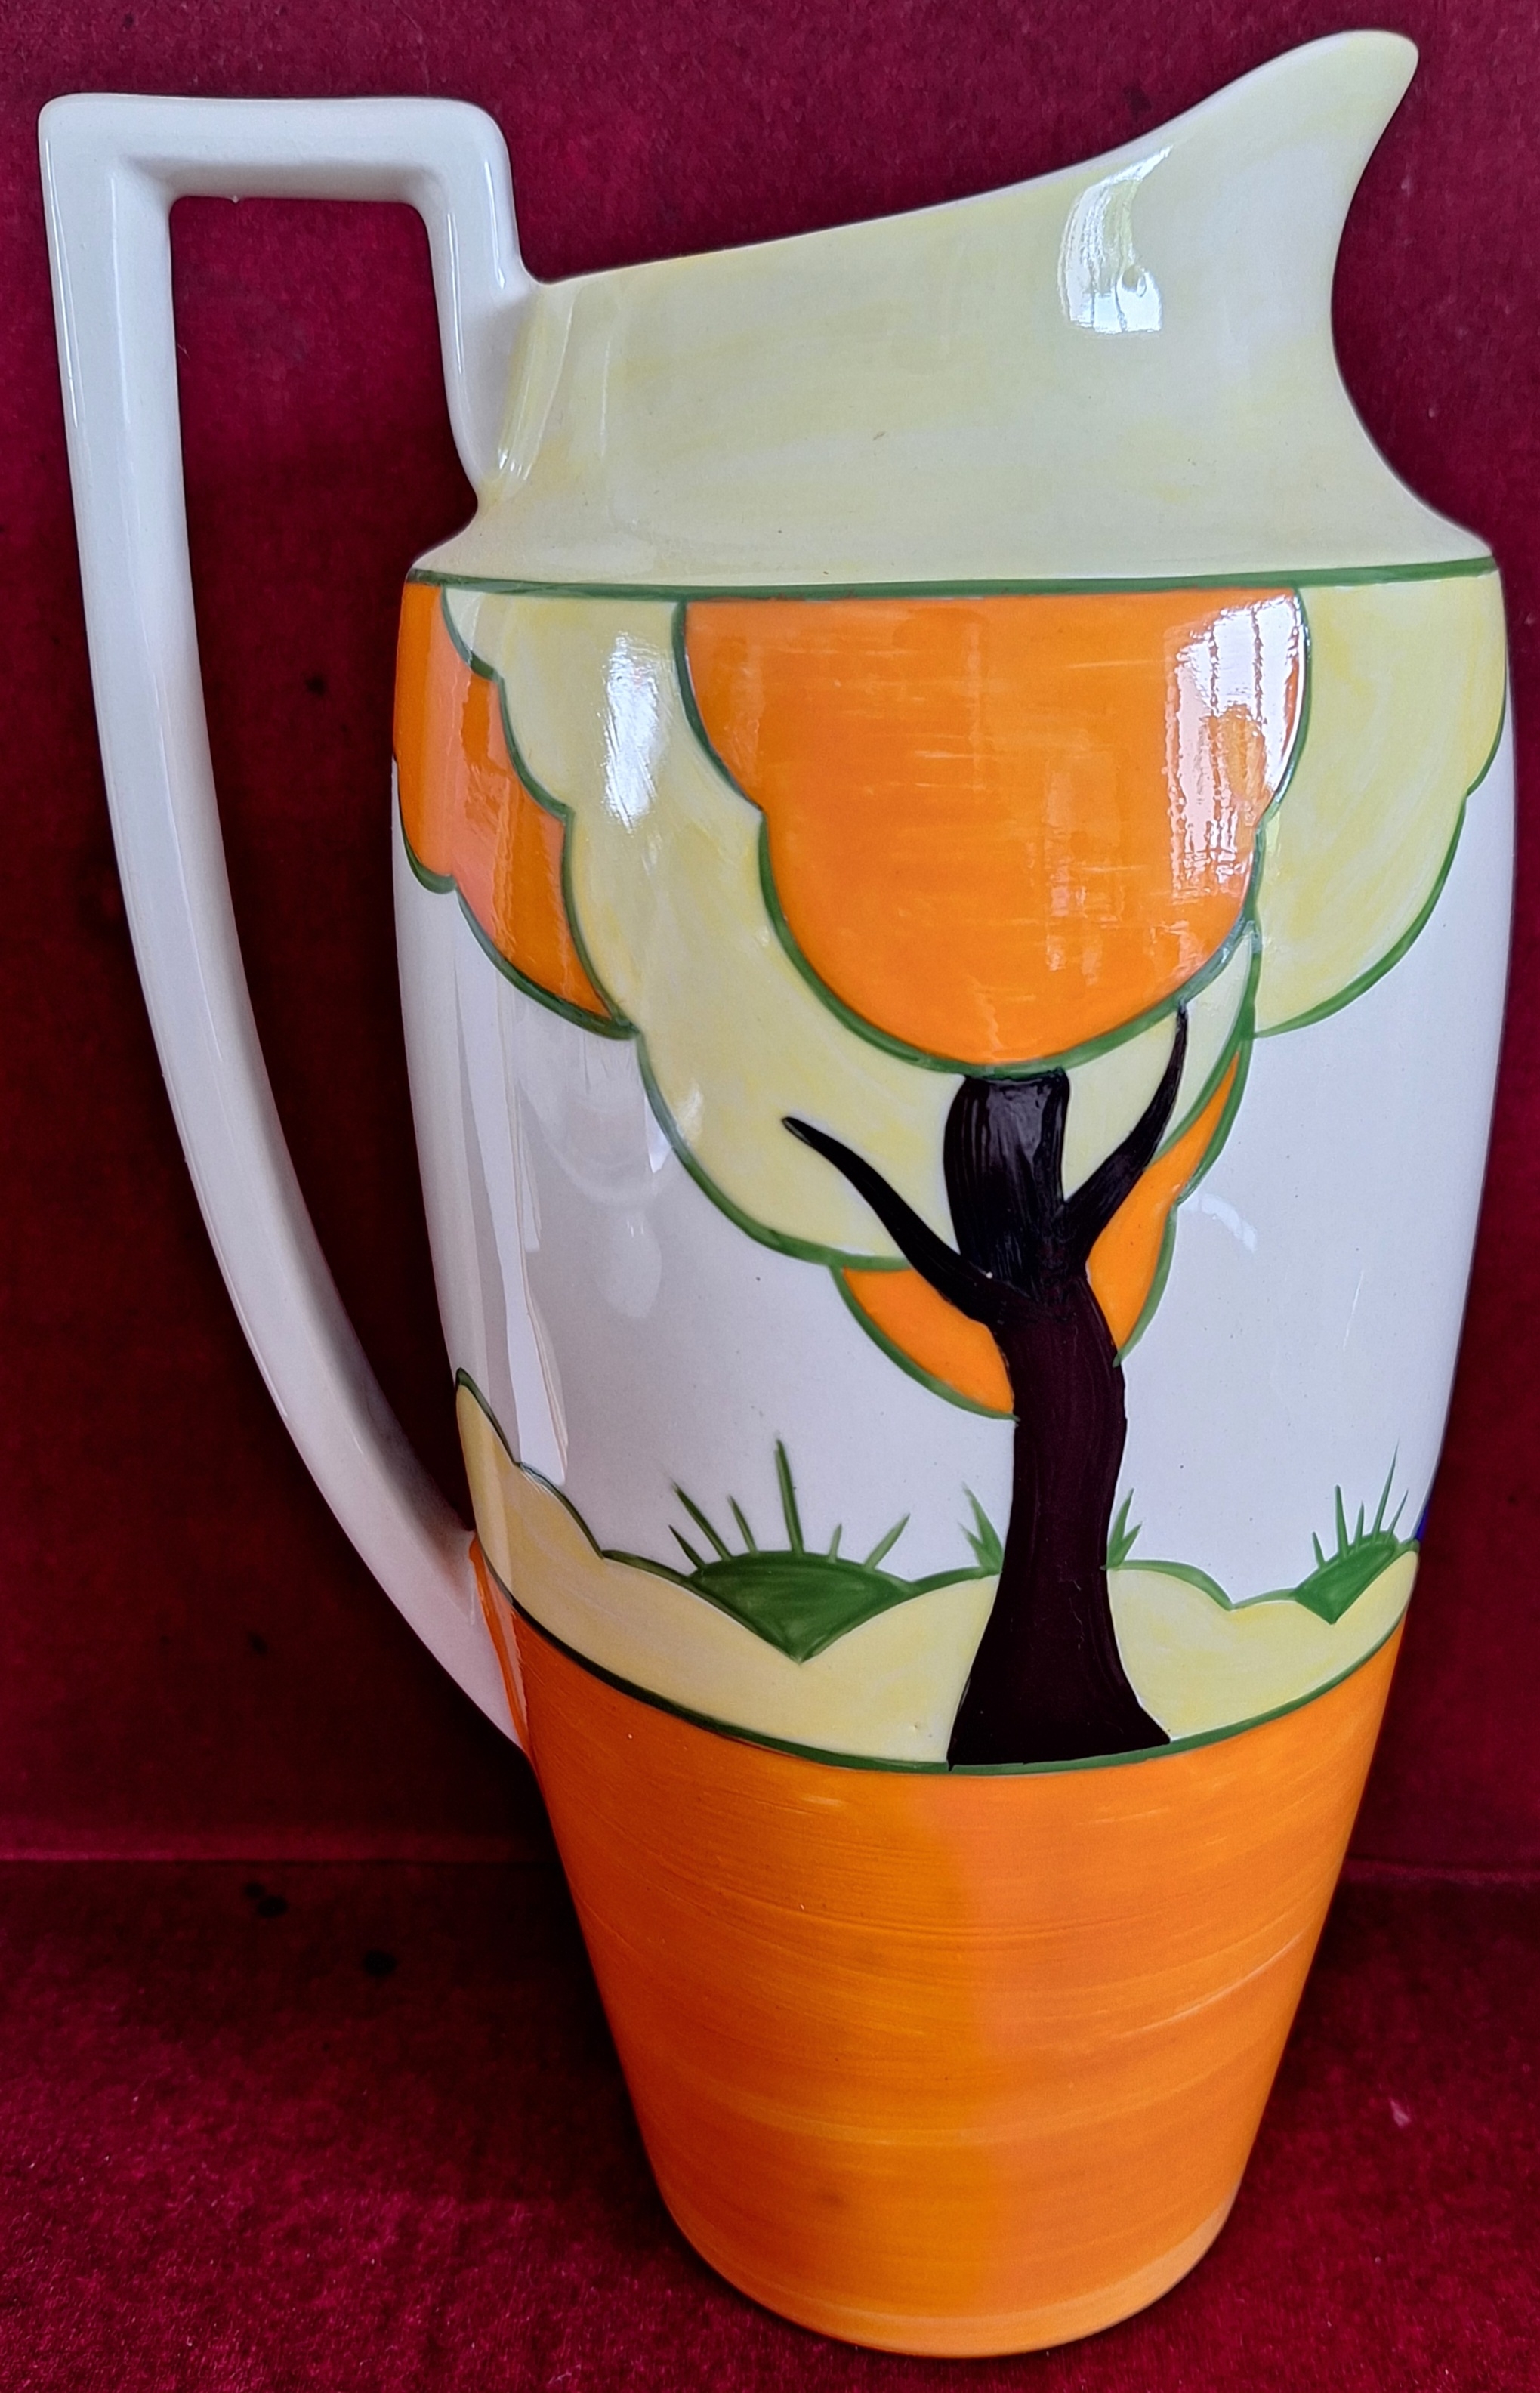 HERON CROSS POTTERY LIMITED EDITION HANDPAINTED JUG "ENCHANTED WOOD" BY DENISE STEELE - Image 2 of 3